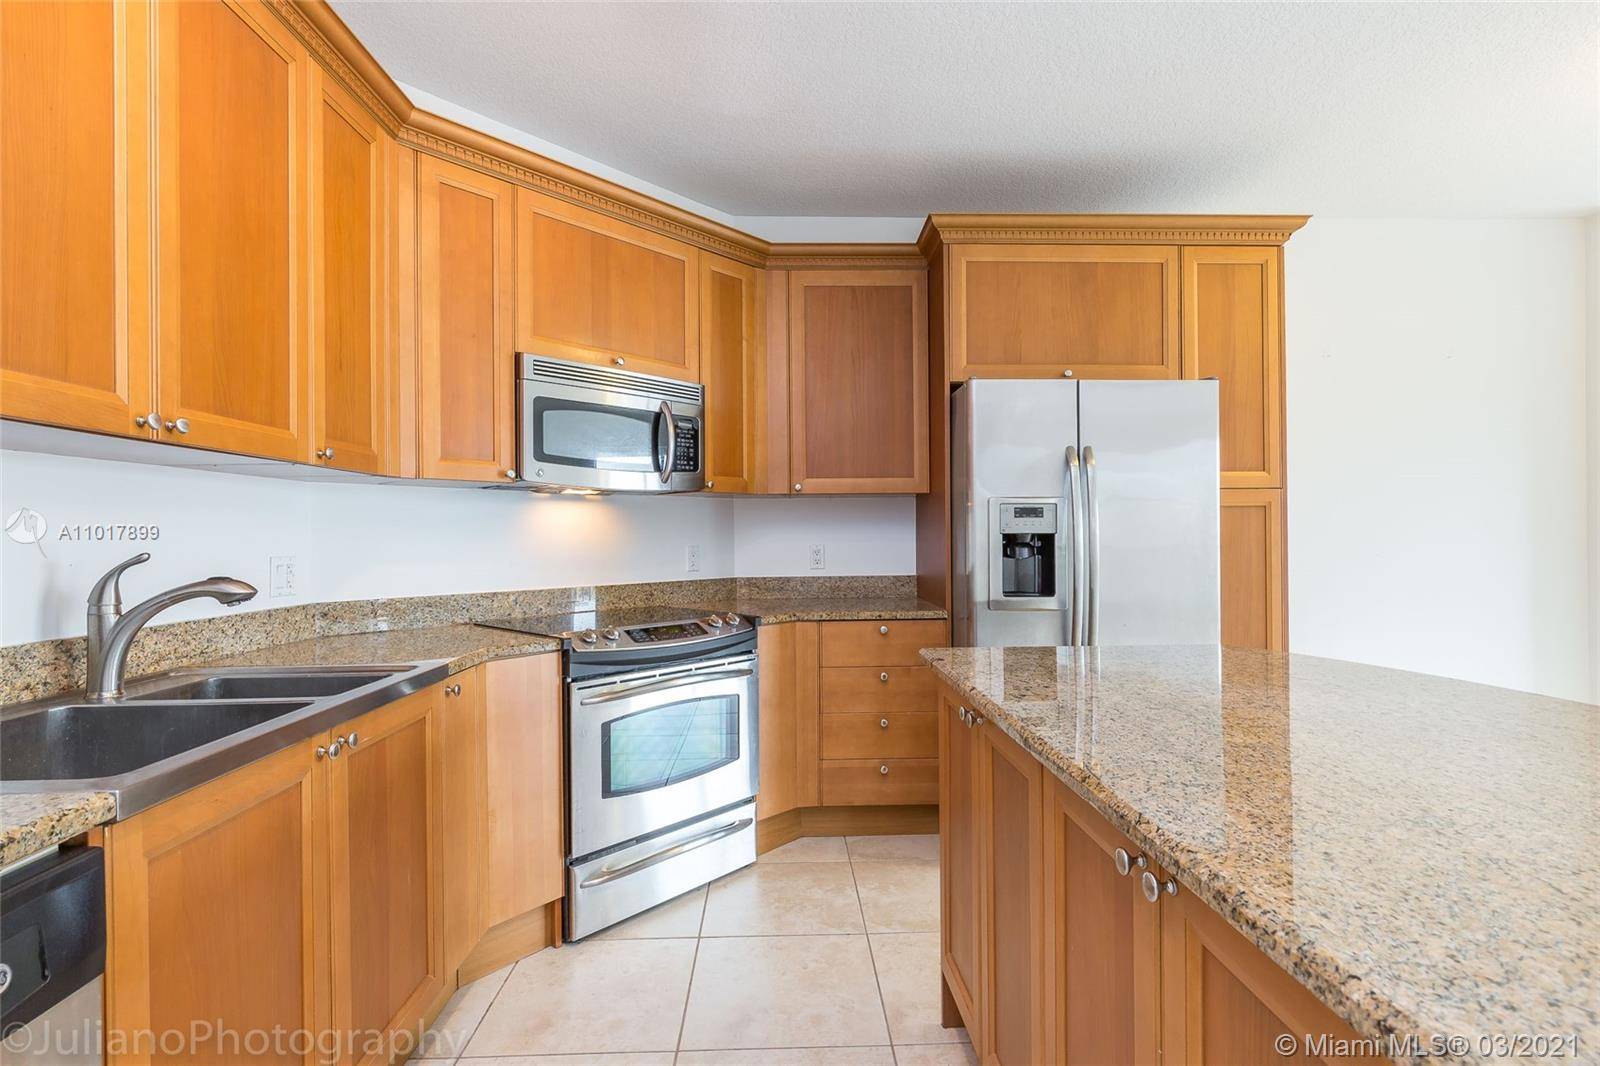 Marble floors, very spacious, wood cabinets, granite countertops, wood closets, washer dryer in unit.